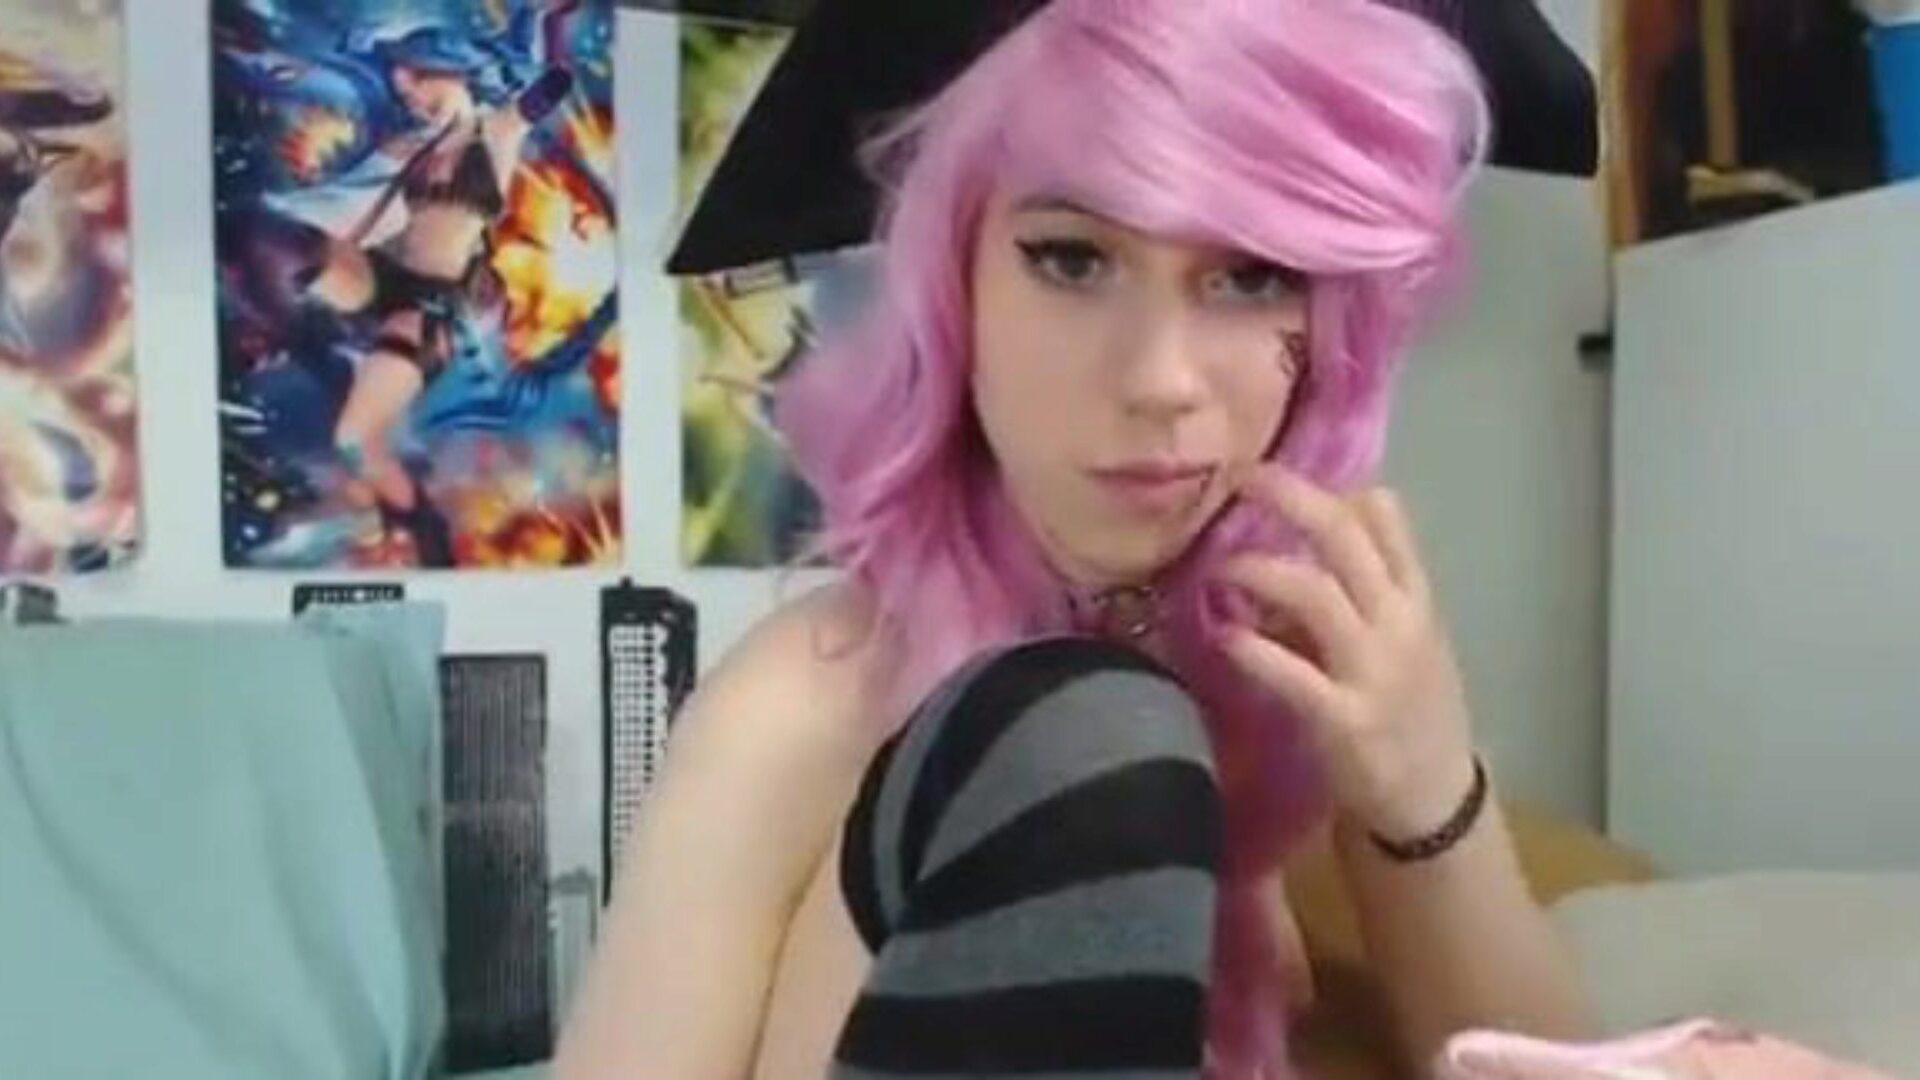 Lana as a Pink Pirate masturbates with viewer managed hook-up plaything